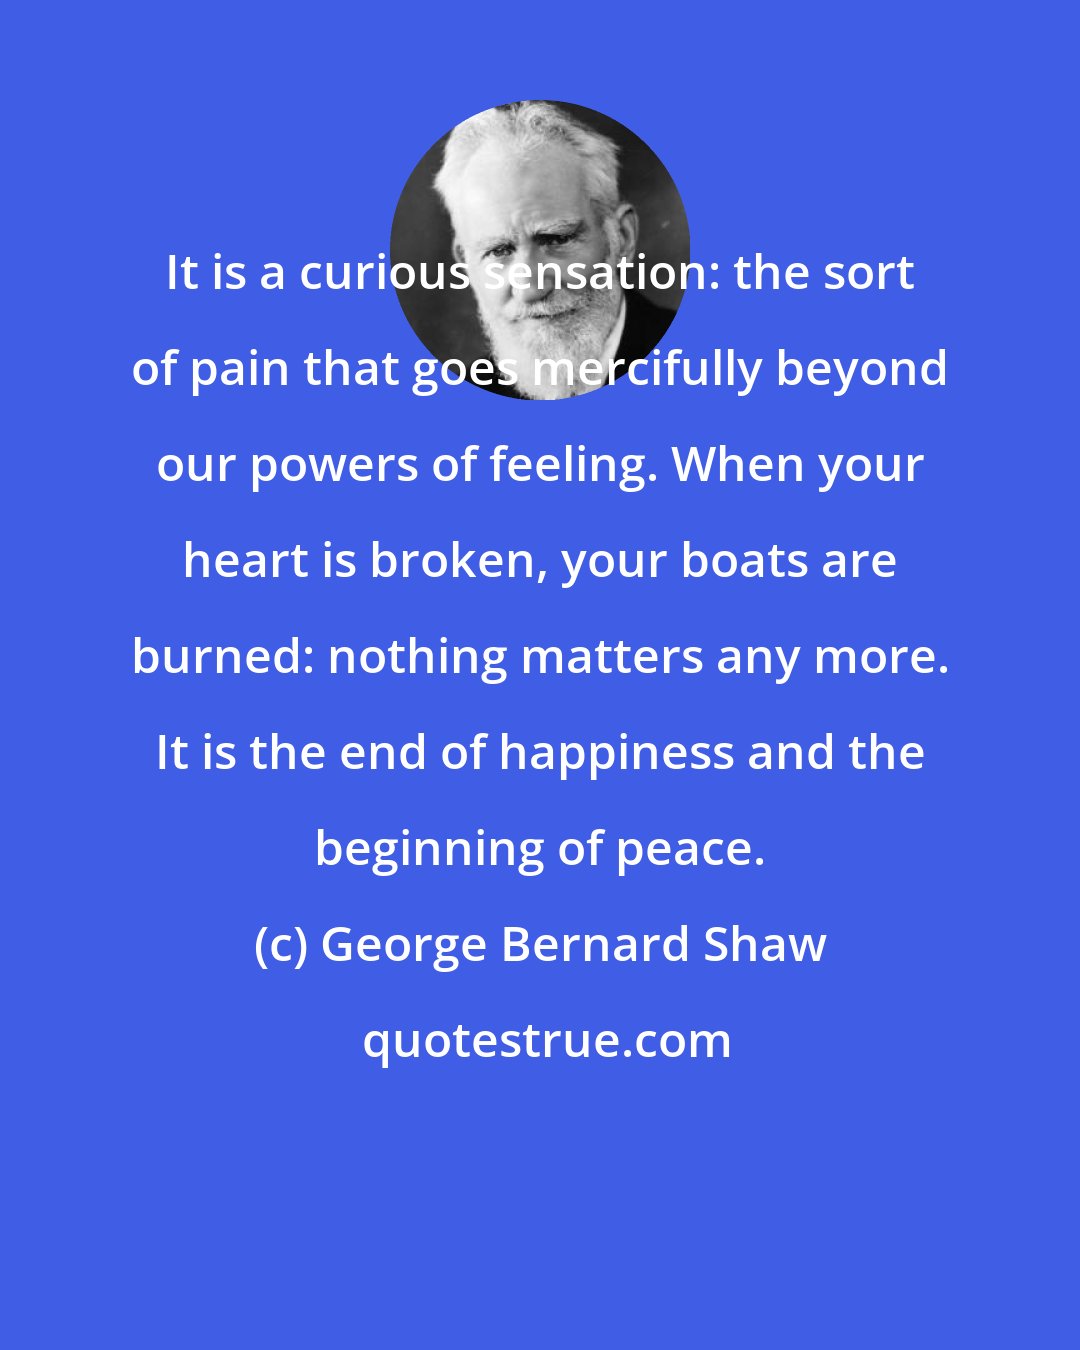 George Bernard Shaw: It is a curious sensation: the sort of pain that goes mercifully beyond our powers of feeling. When your heart is broken, your boats are burned: nothing matters any more. It is the end of happiness and the beginning of peace.